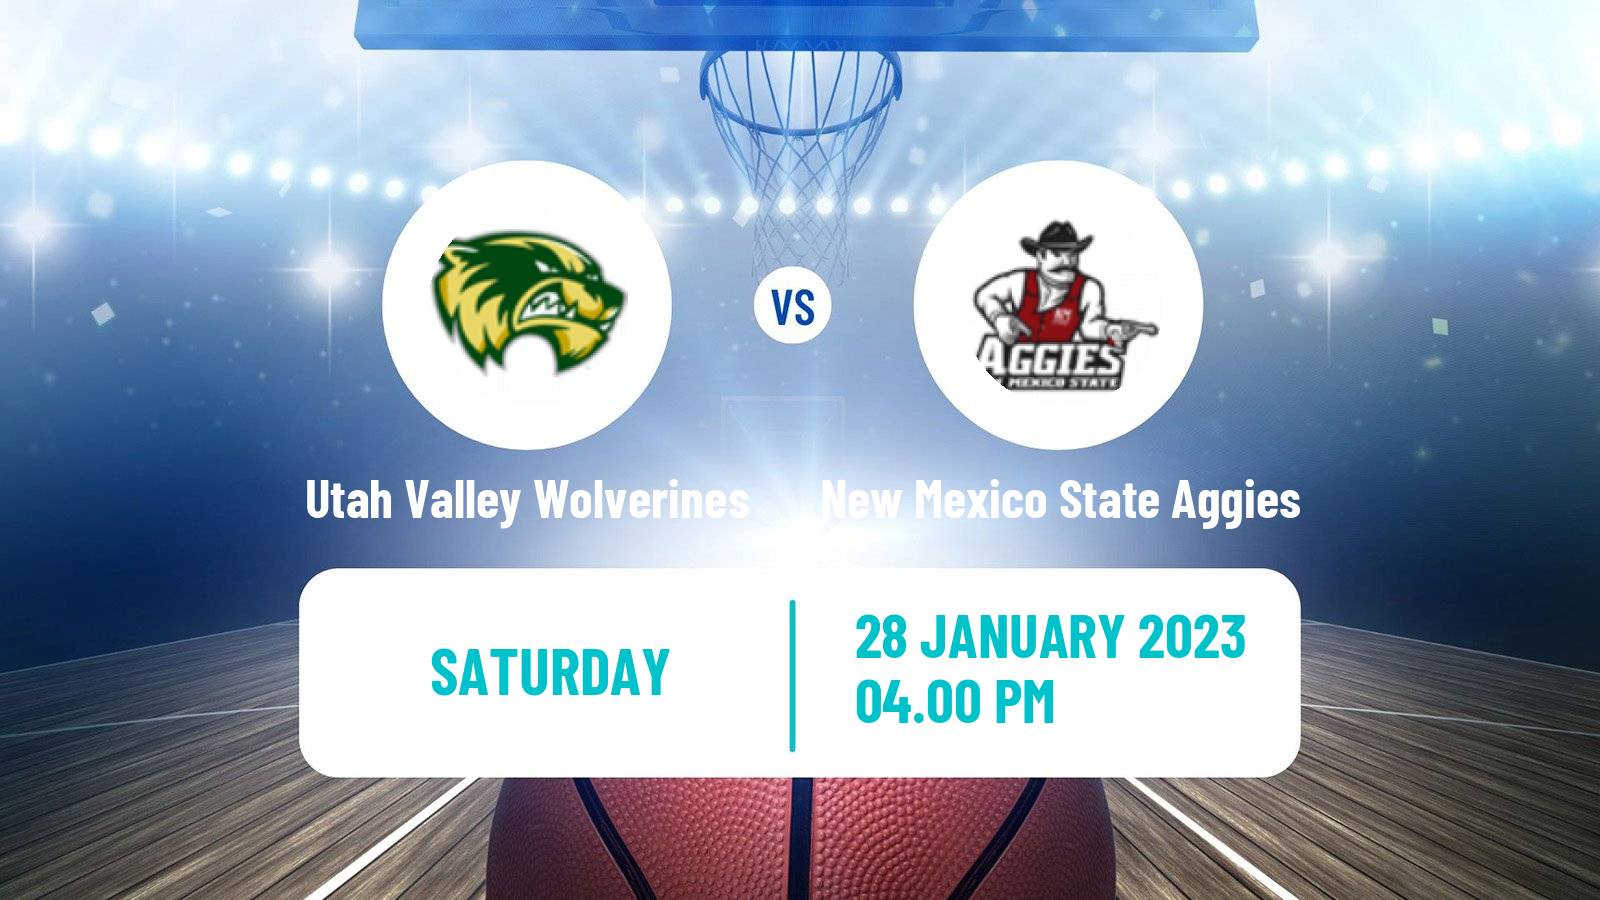 Basketball NCAA College Basketball Utah Valley Wolverines - New Mexico State Aggies